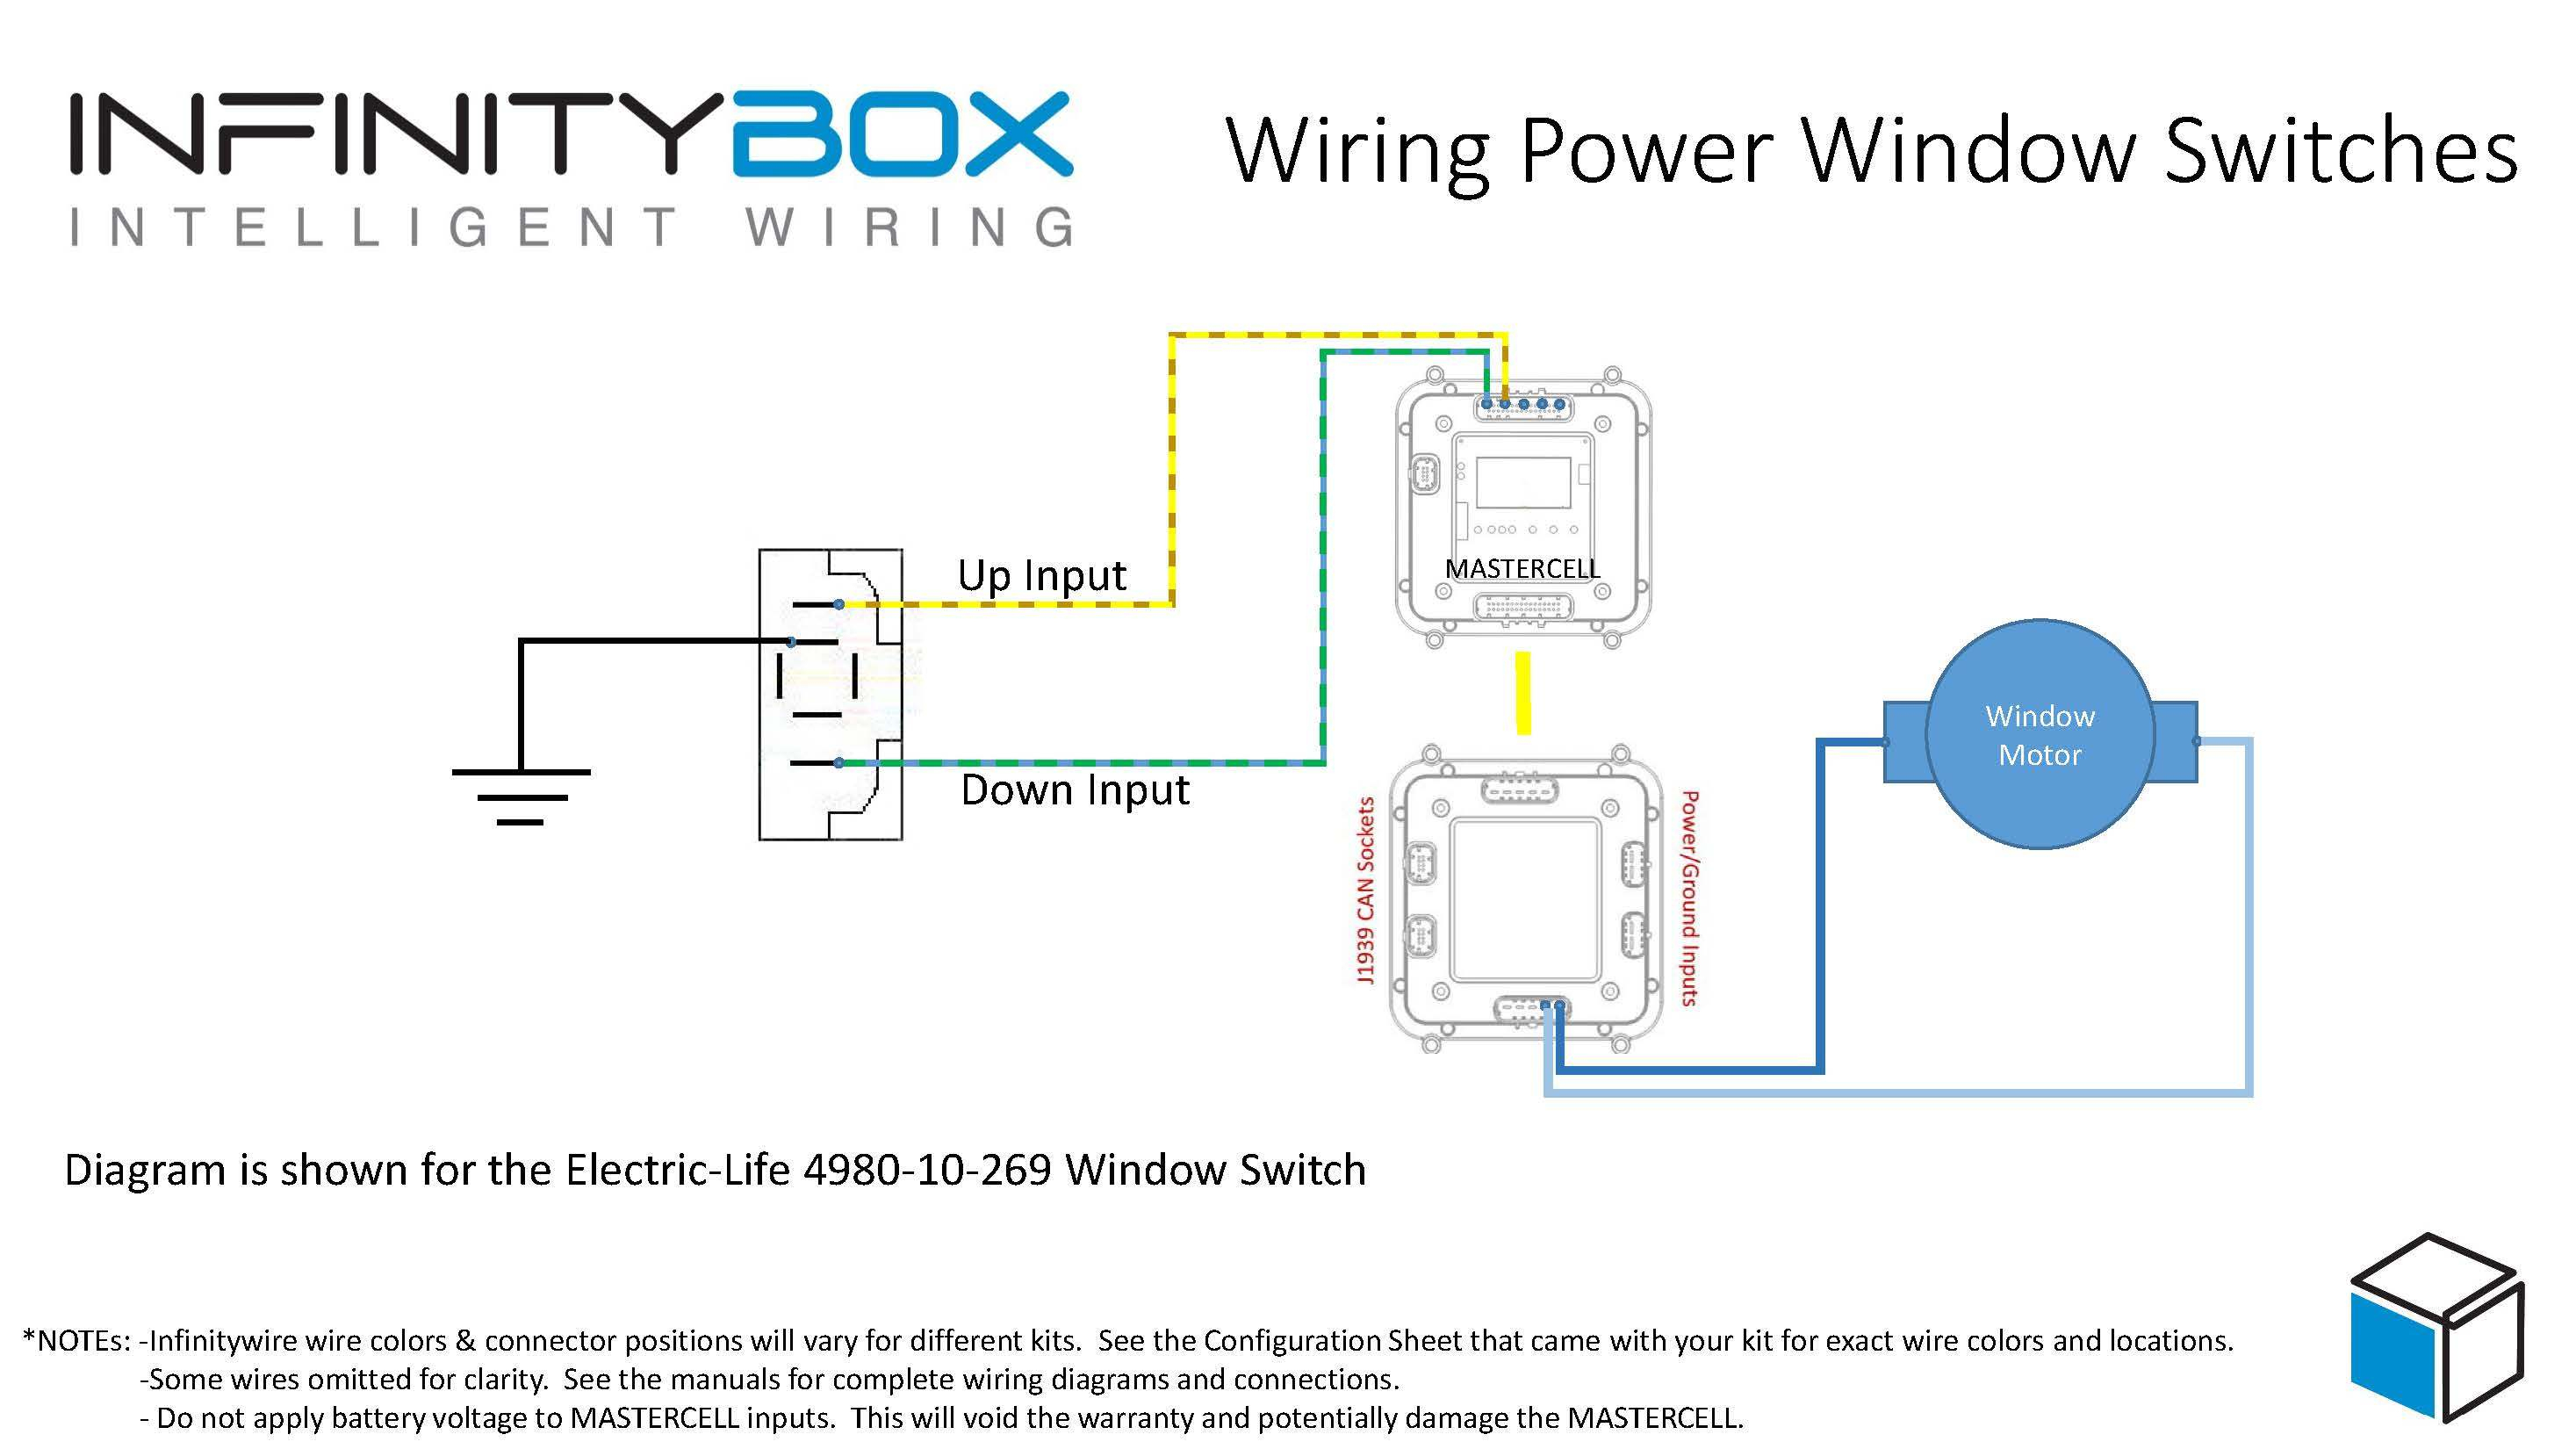 5 Wire Window Switch Diagram | Wiring Library - 5 Pin Power Window Switch Wiring Diagram